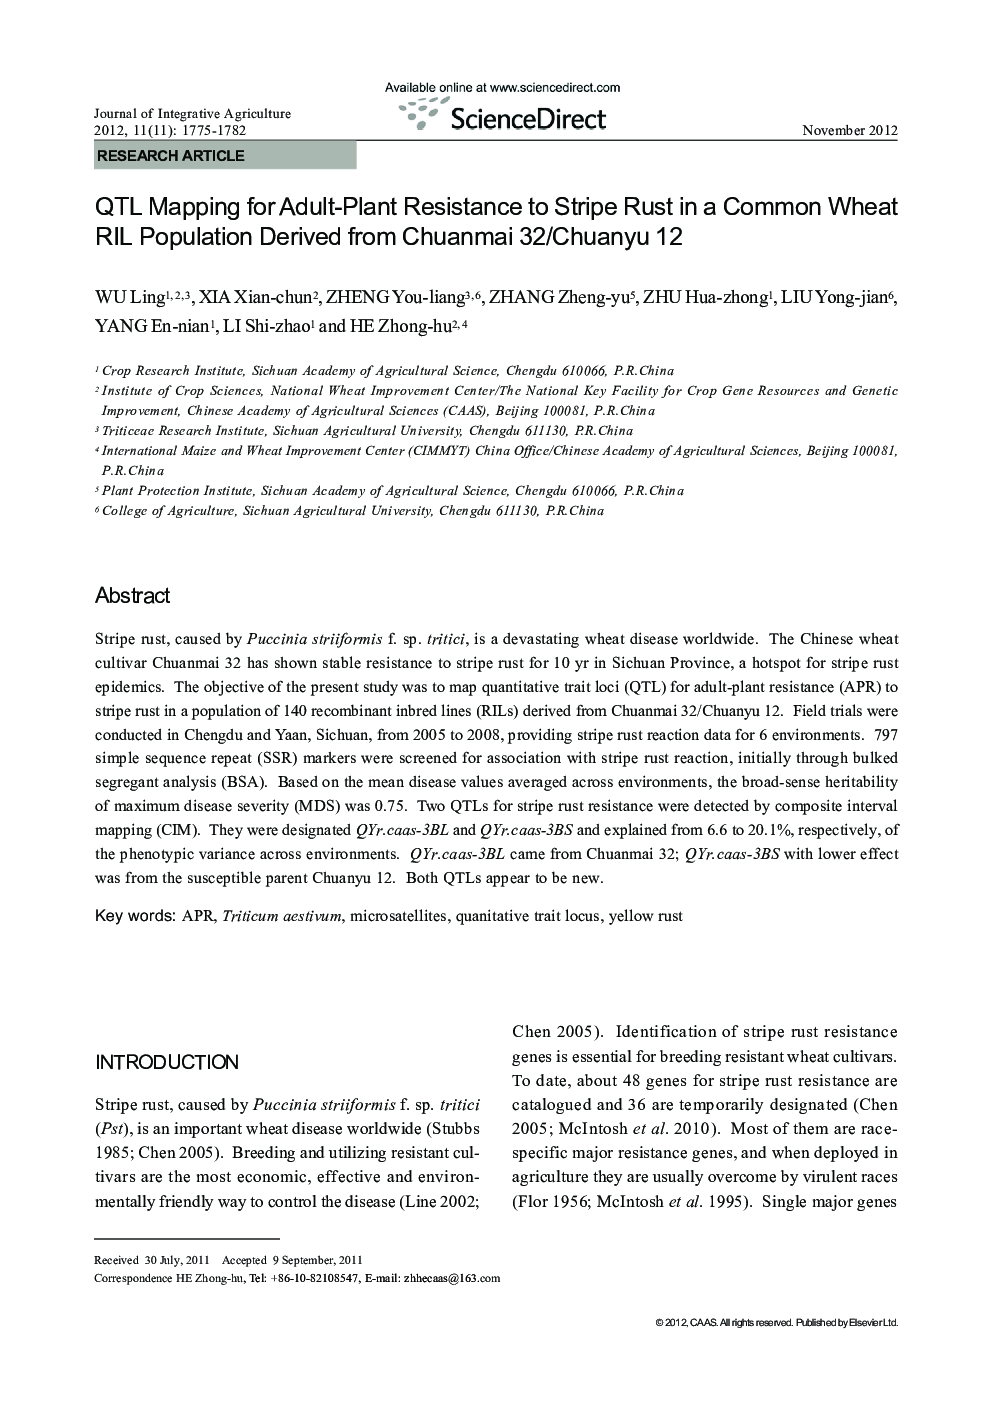 QTL Mapping for Adult-Plant Resistance to Stripe Rust in a Common Wheat RIL Population Derived from Chuanmai 32/Chuanyu 12